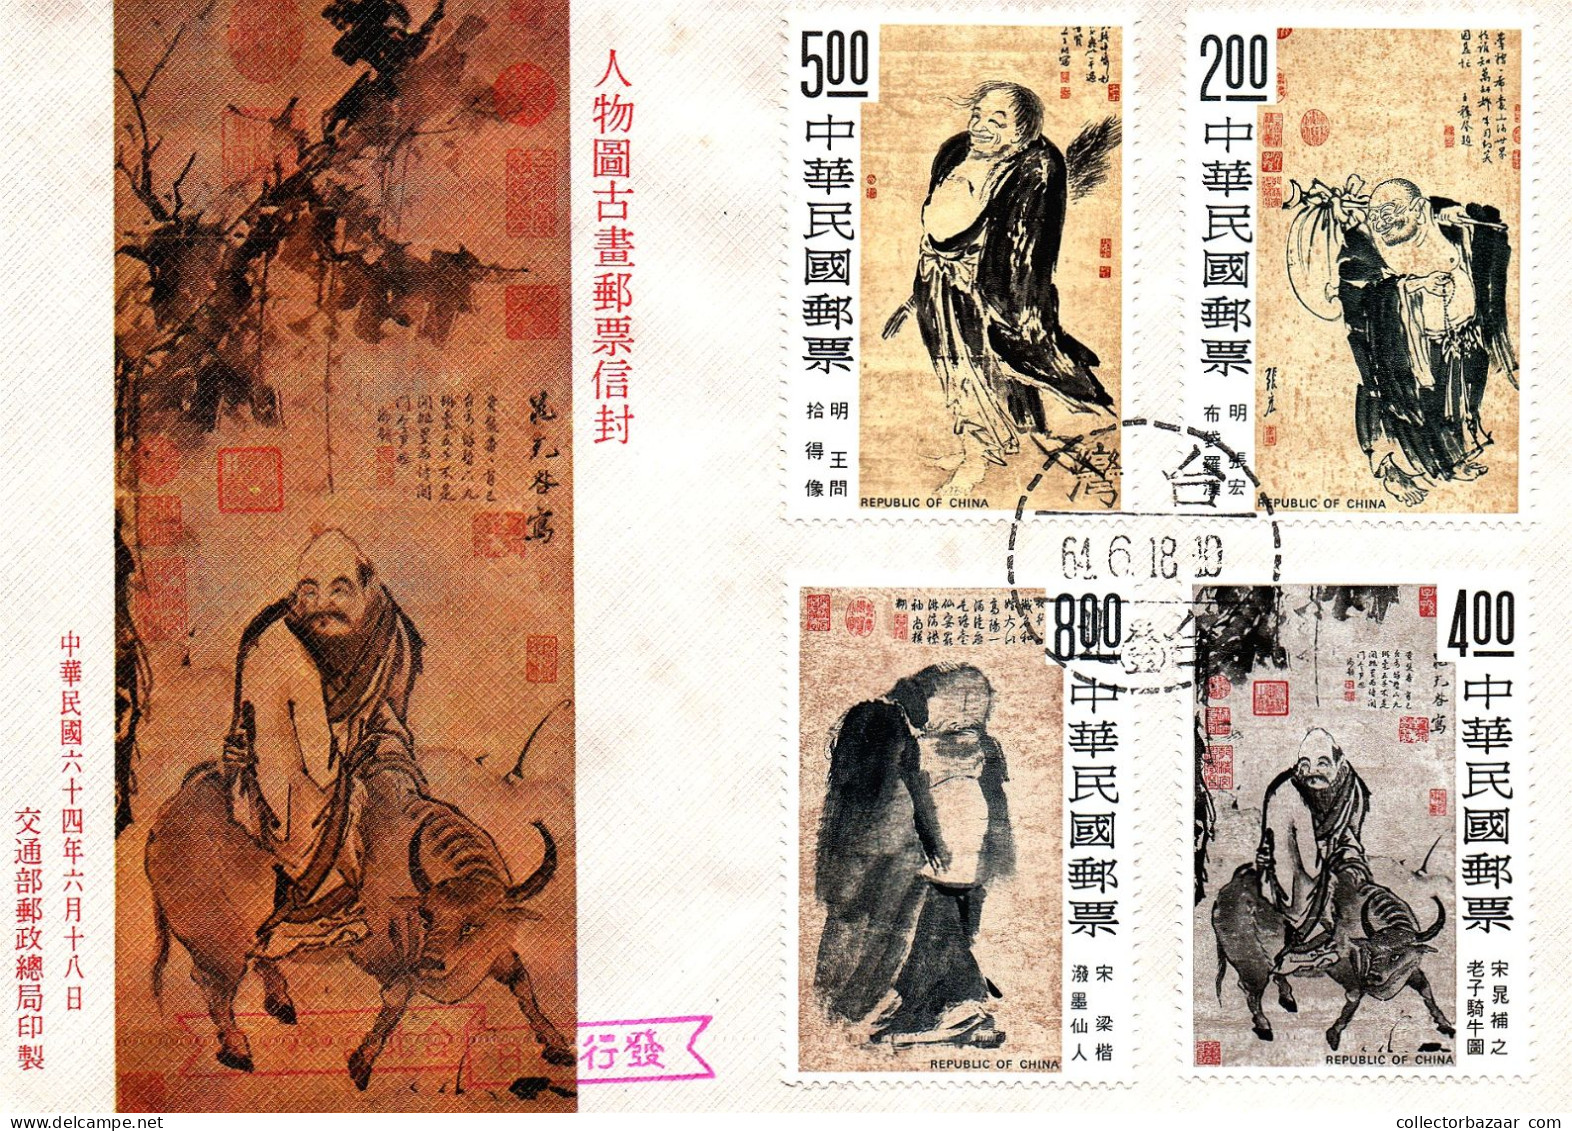 Taiwan Formosa Republic Of China FDC Art Paintings Drawings Culture Traditional People Costumes - 8$,5$,4$ And 2$ Stamps - FDC